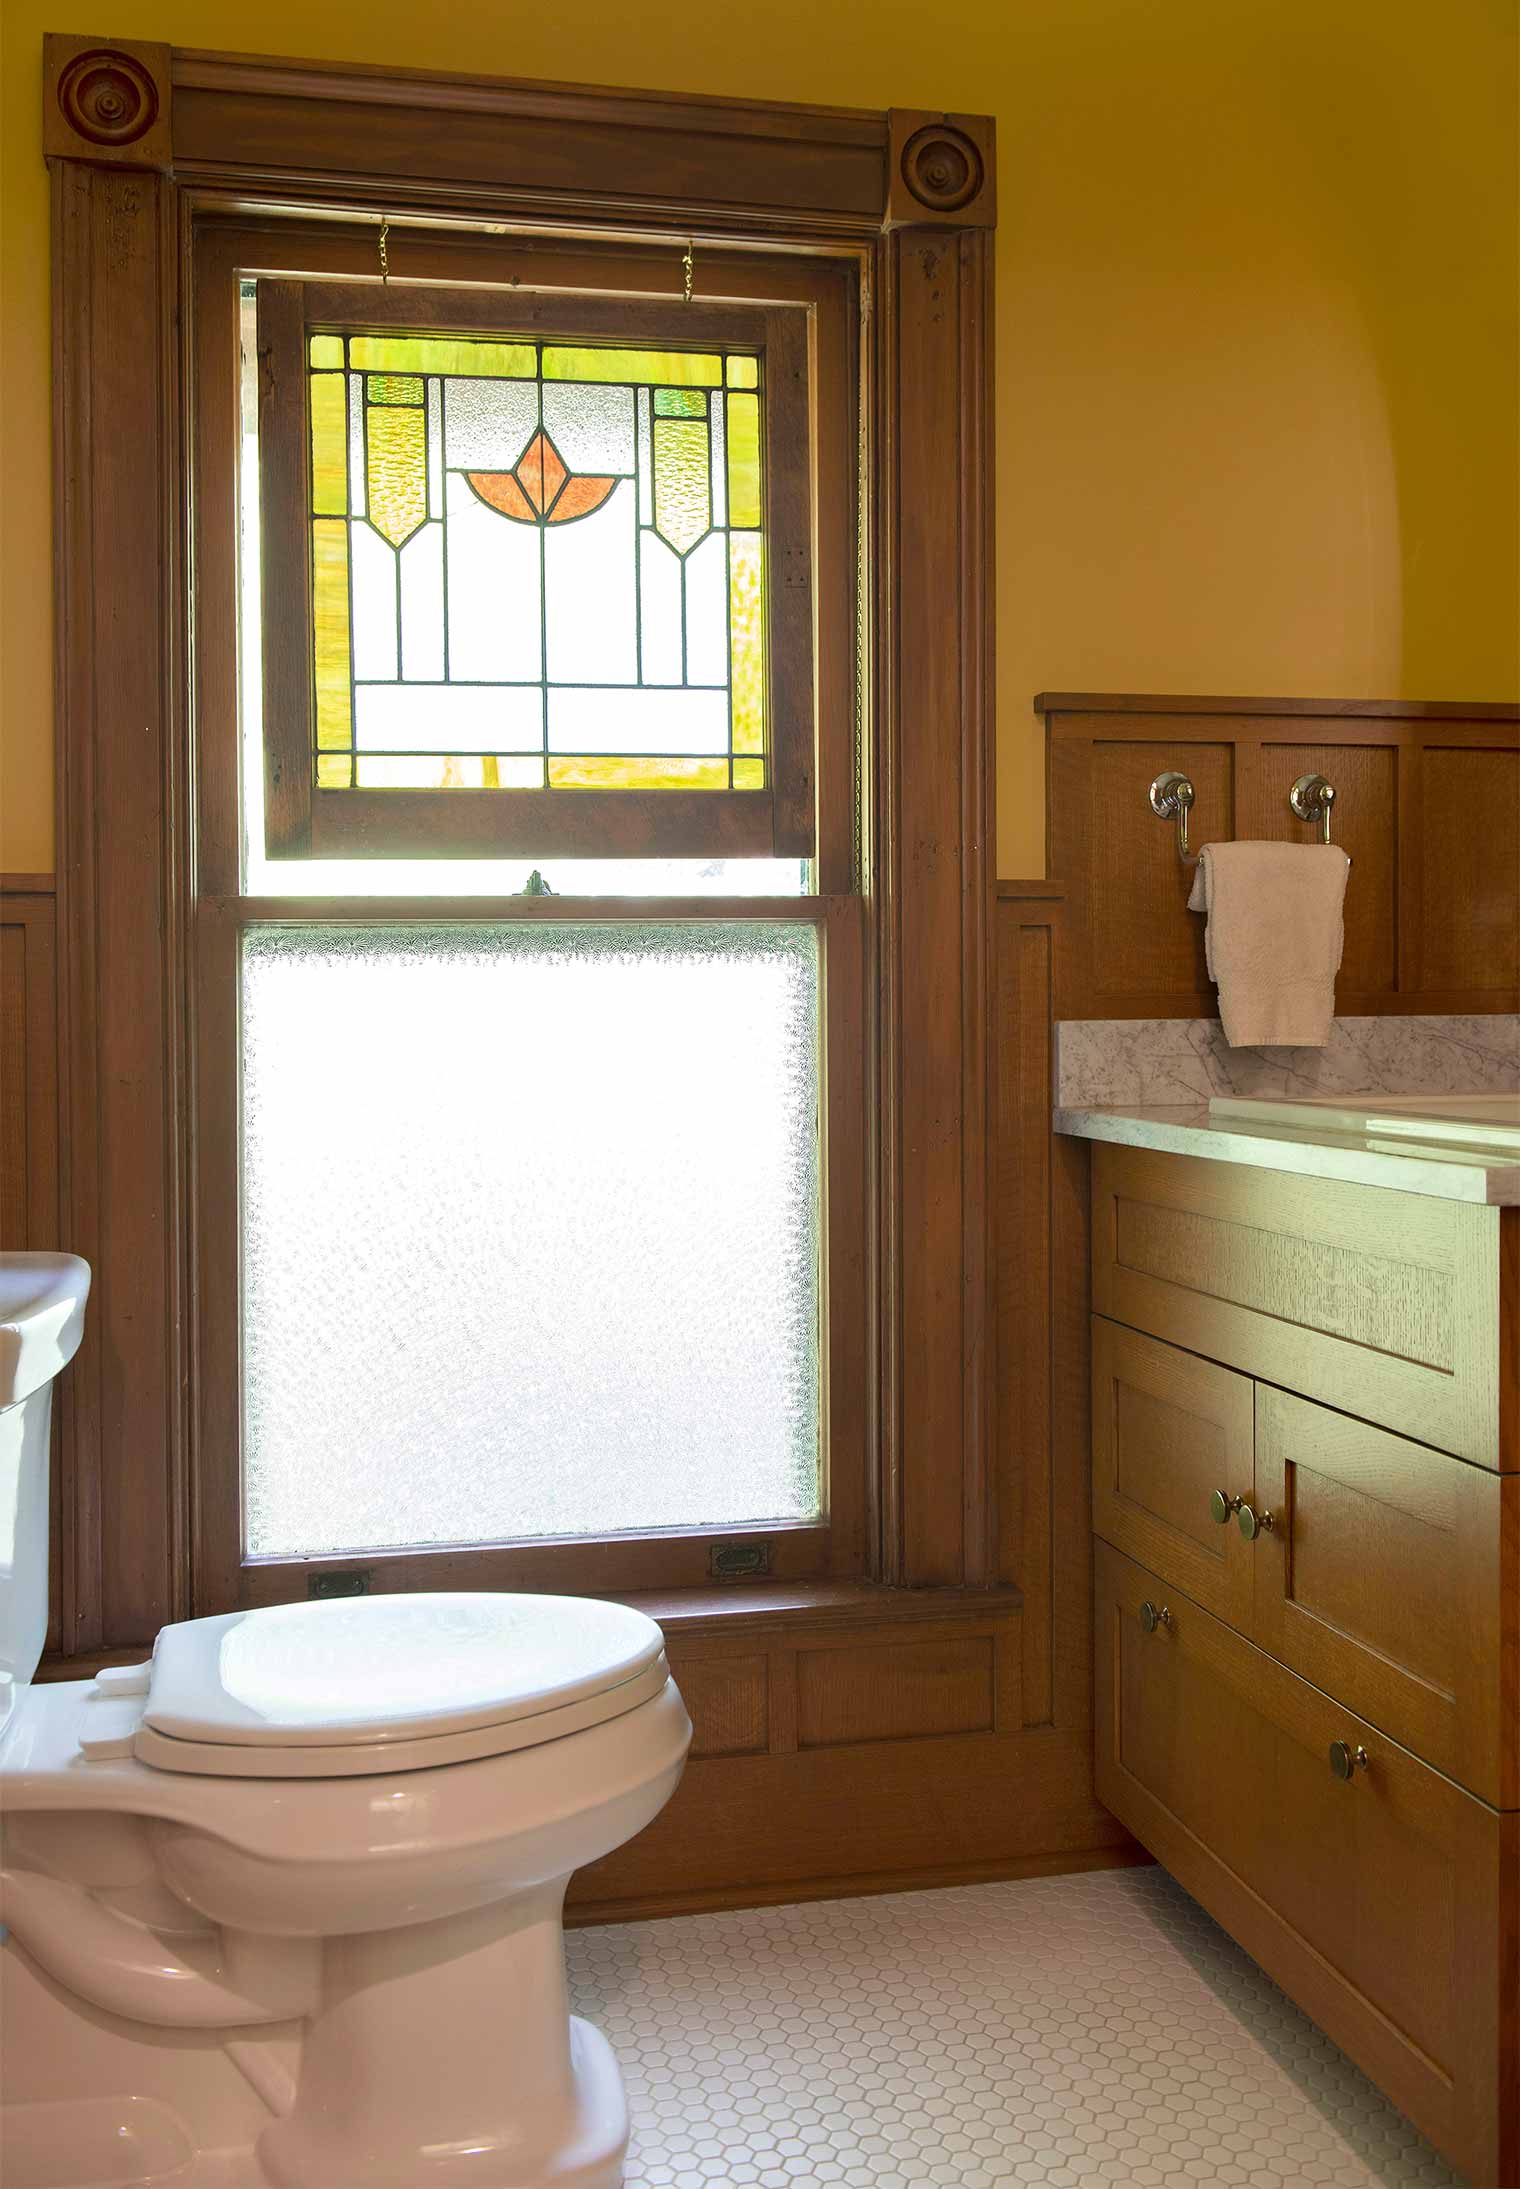 bathroom remodel in a Des Moines Victorian home renovation by Silent Rivers features stained glass window